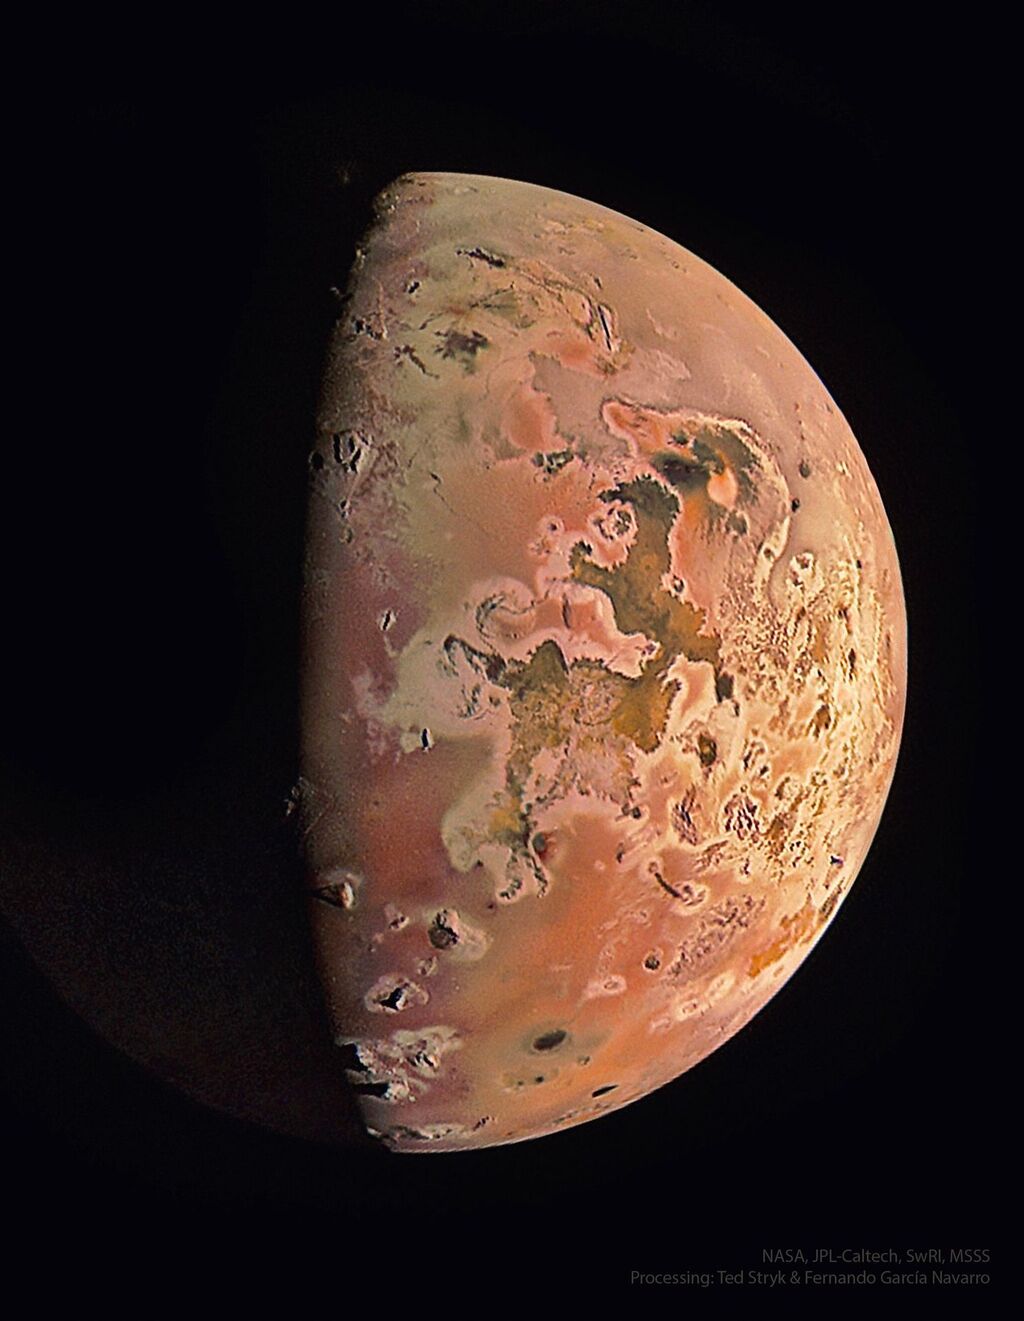 Orangel marbled surface of the moon Io against the black background of space